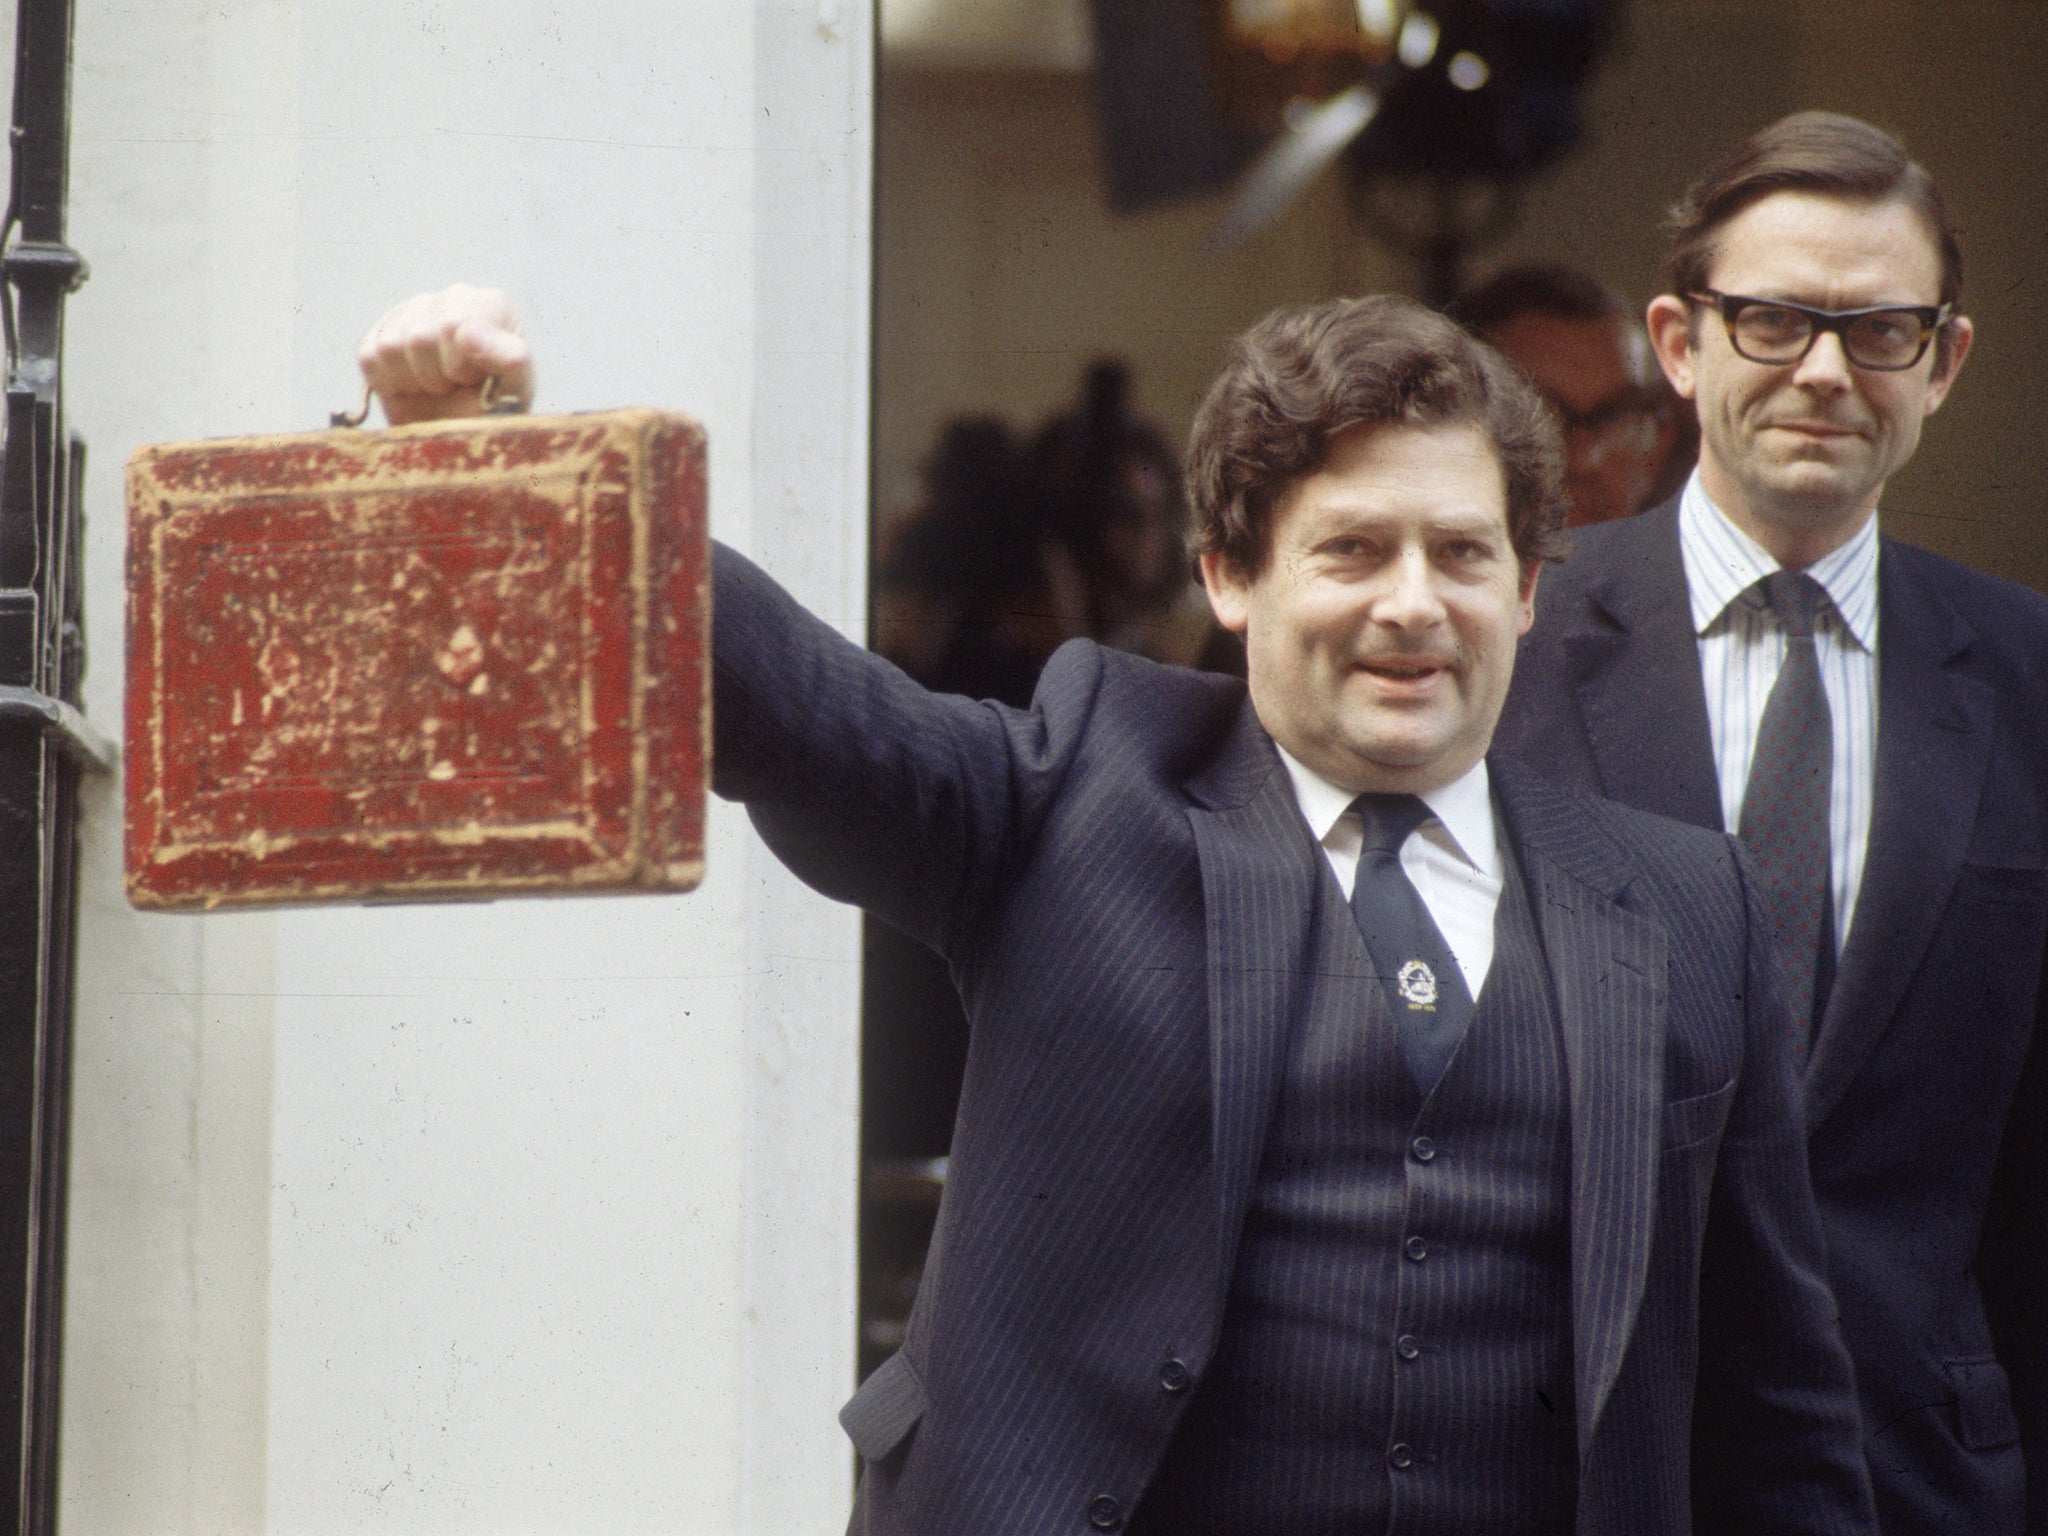 Former Chancellor of the Exchequer, Nigel Lawson, holding the famous Budget Box aloft outside Downing Street in 1984